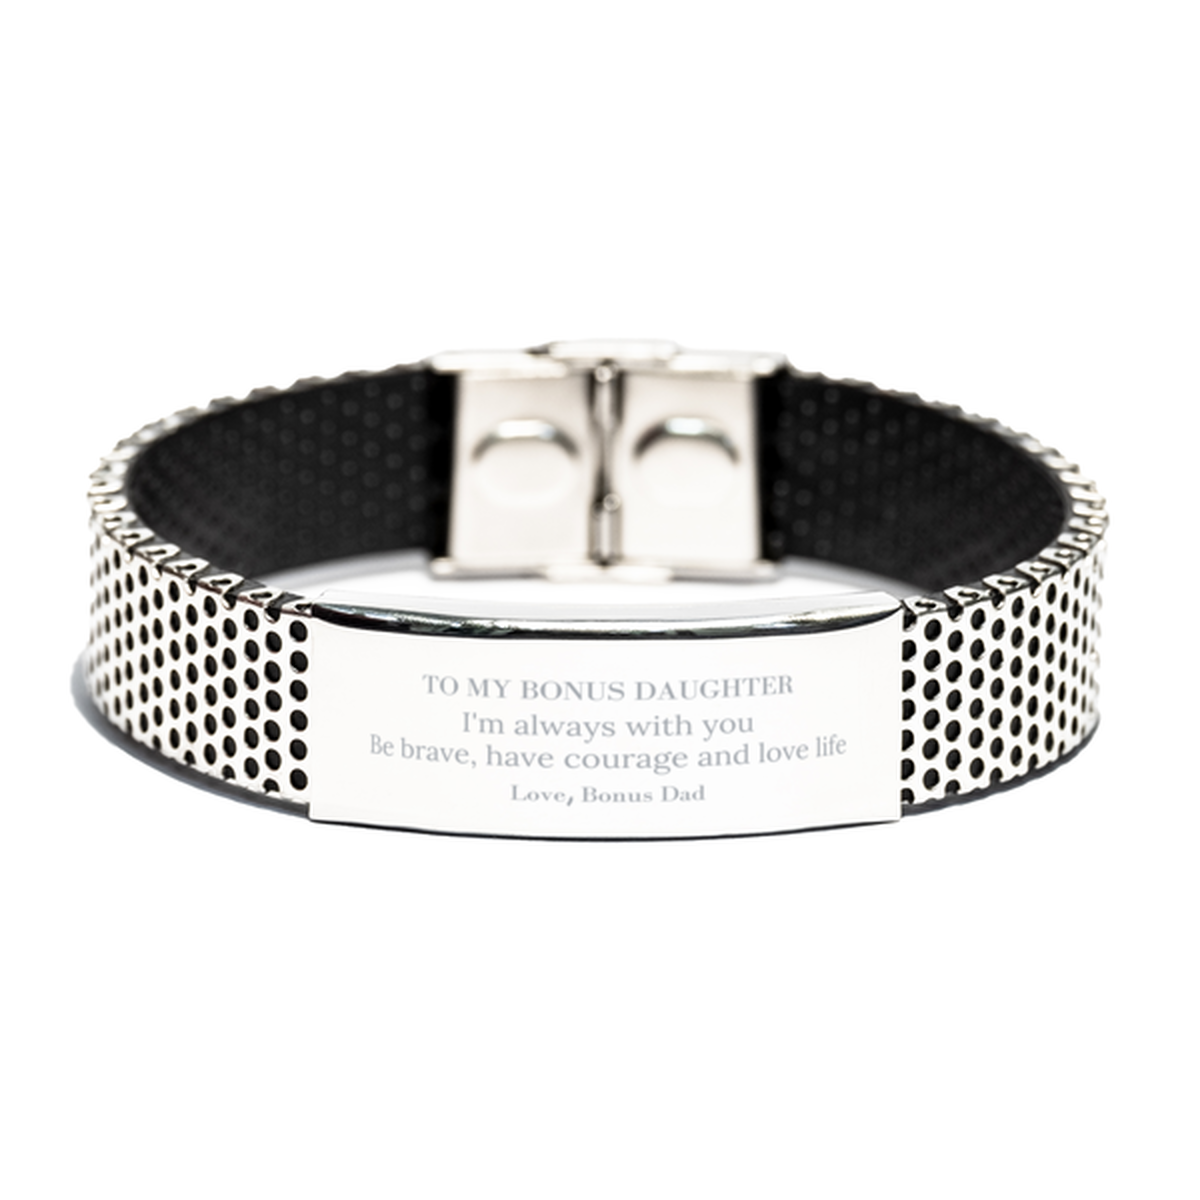 To My Bonus Daughter Gifts from Bonus Dad, Unique Stainless Steel Bracelet Inspirational Christmas Birthday Graduation Gifts for Bonus Daughter I'm always with you. Be brave, have courage and love life. Love, Bonus Dad